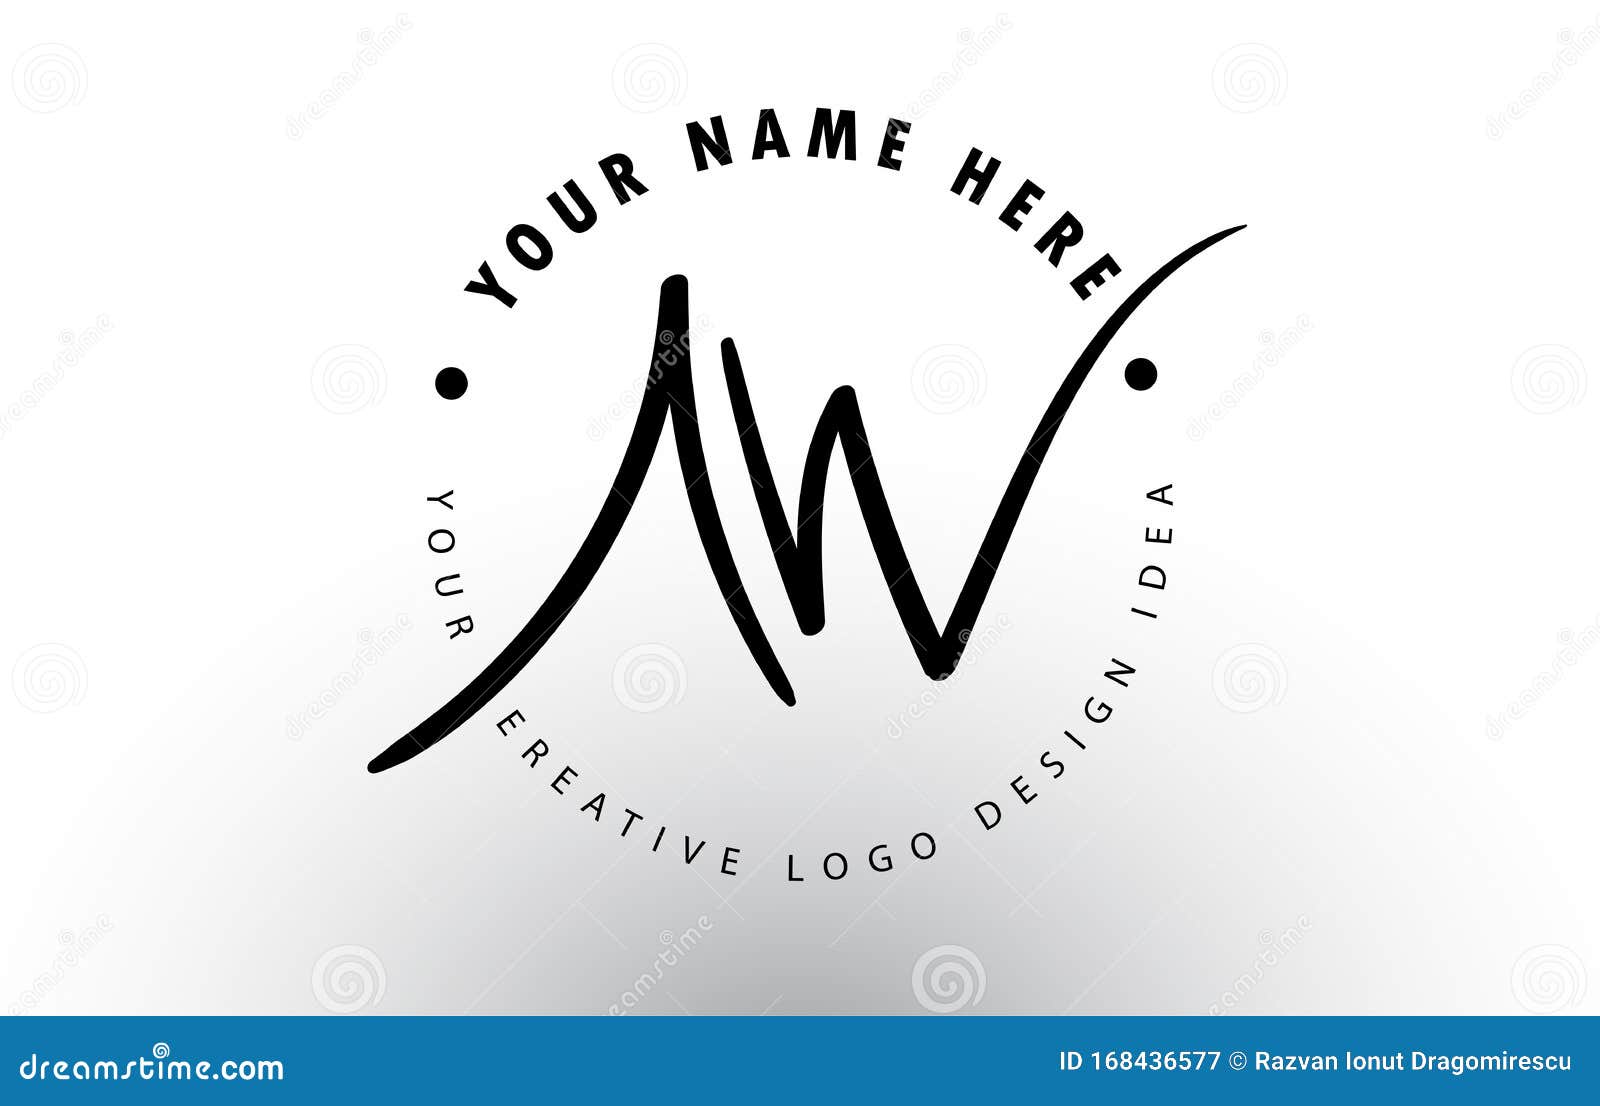 What Is A Generic Logo? Avoiding Overused Logo Designs